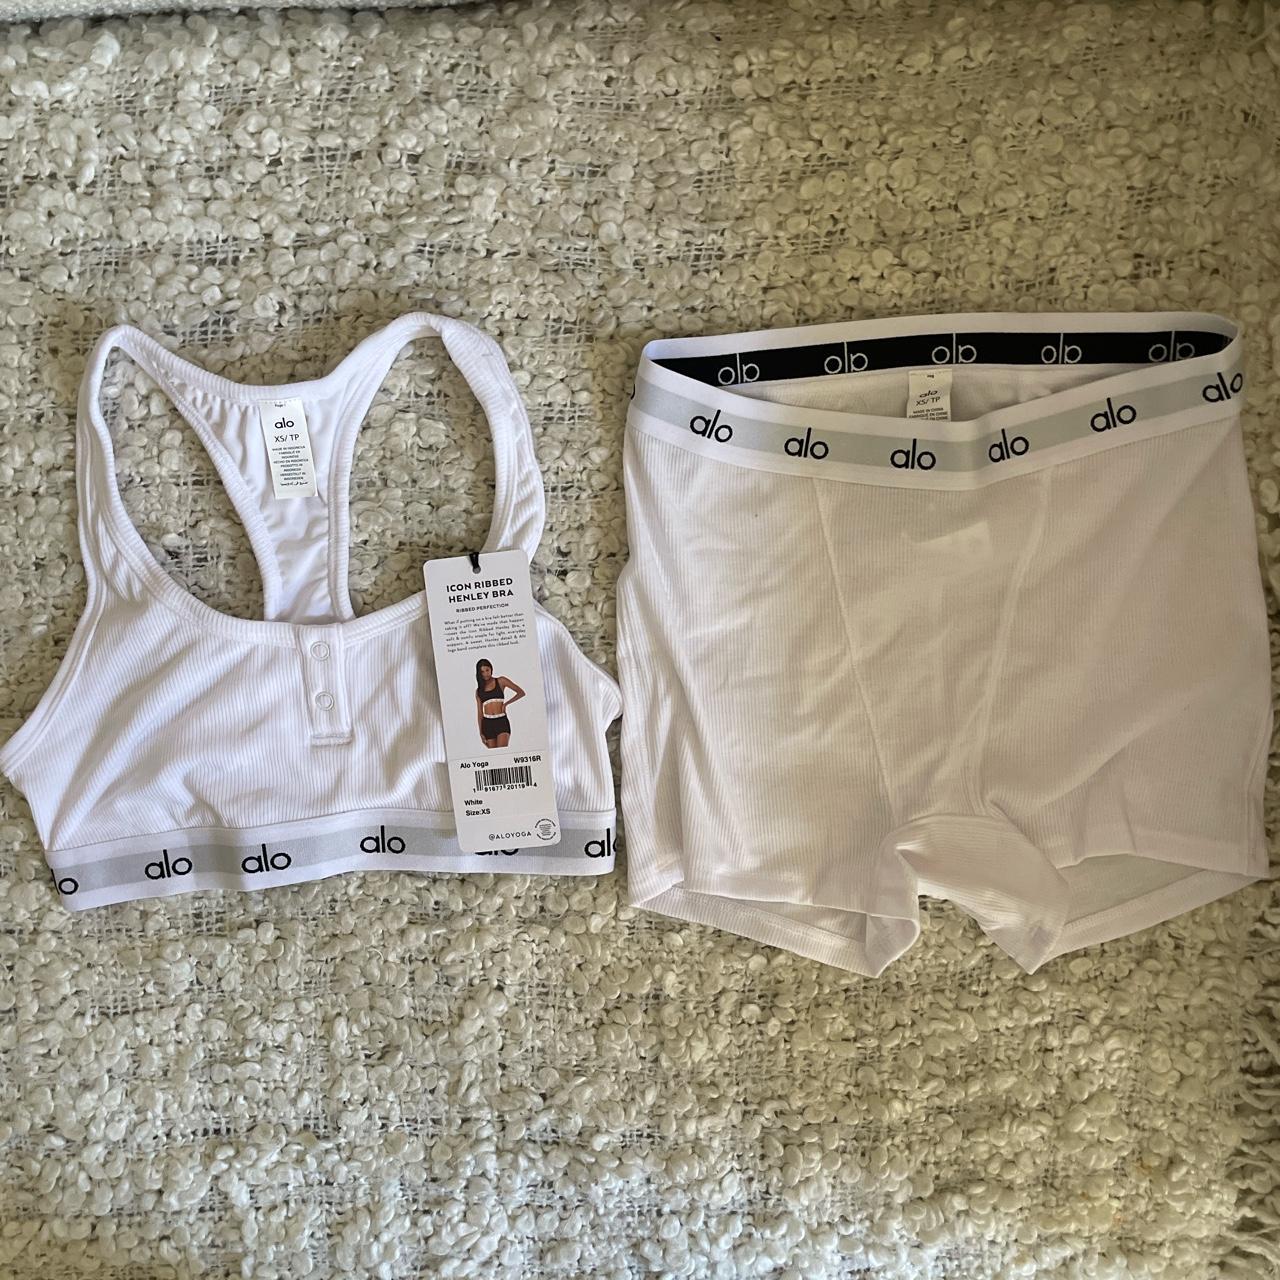 Alo Icon Ribbed Henley Bra and Boy Shorts in White - Depop